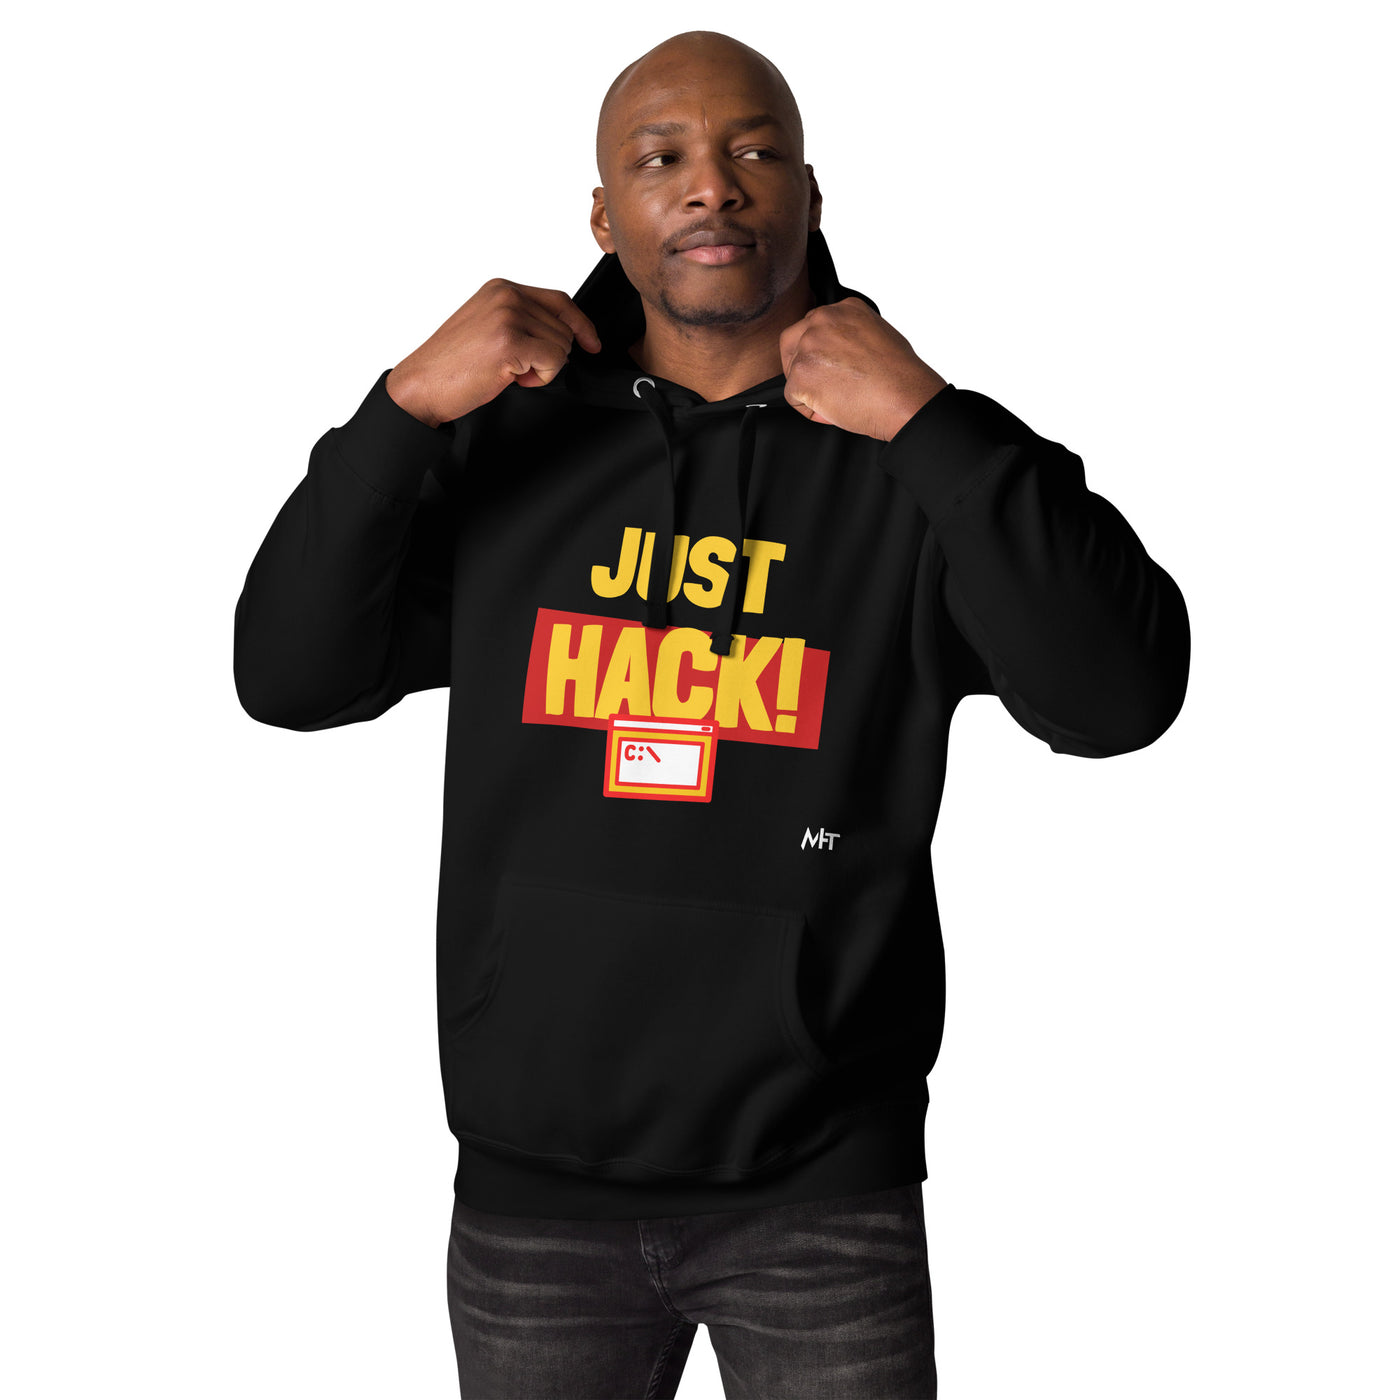 Just Hack (Yellow Text) - Unisex Hoodie